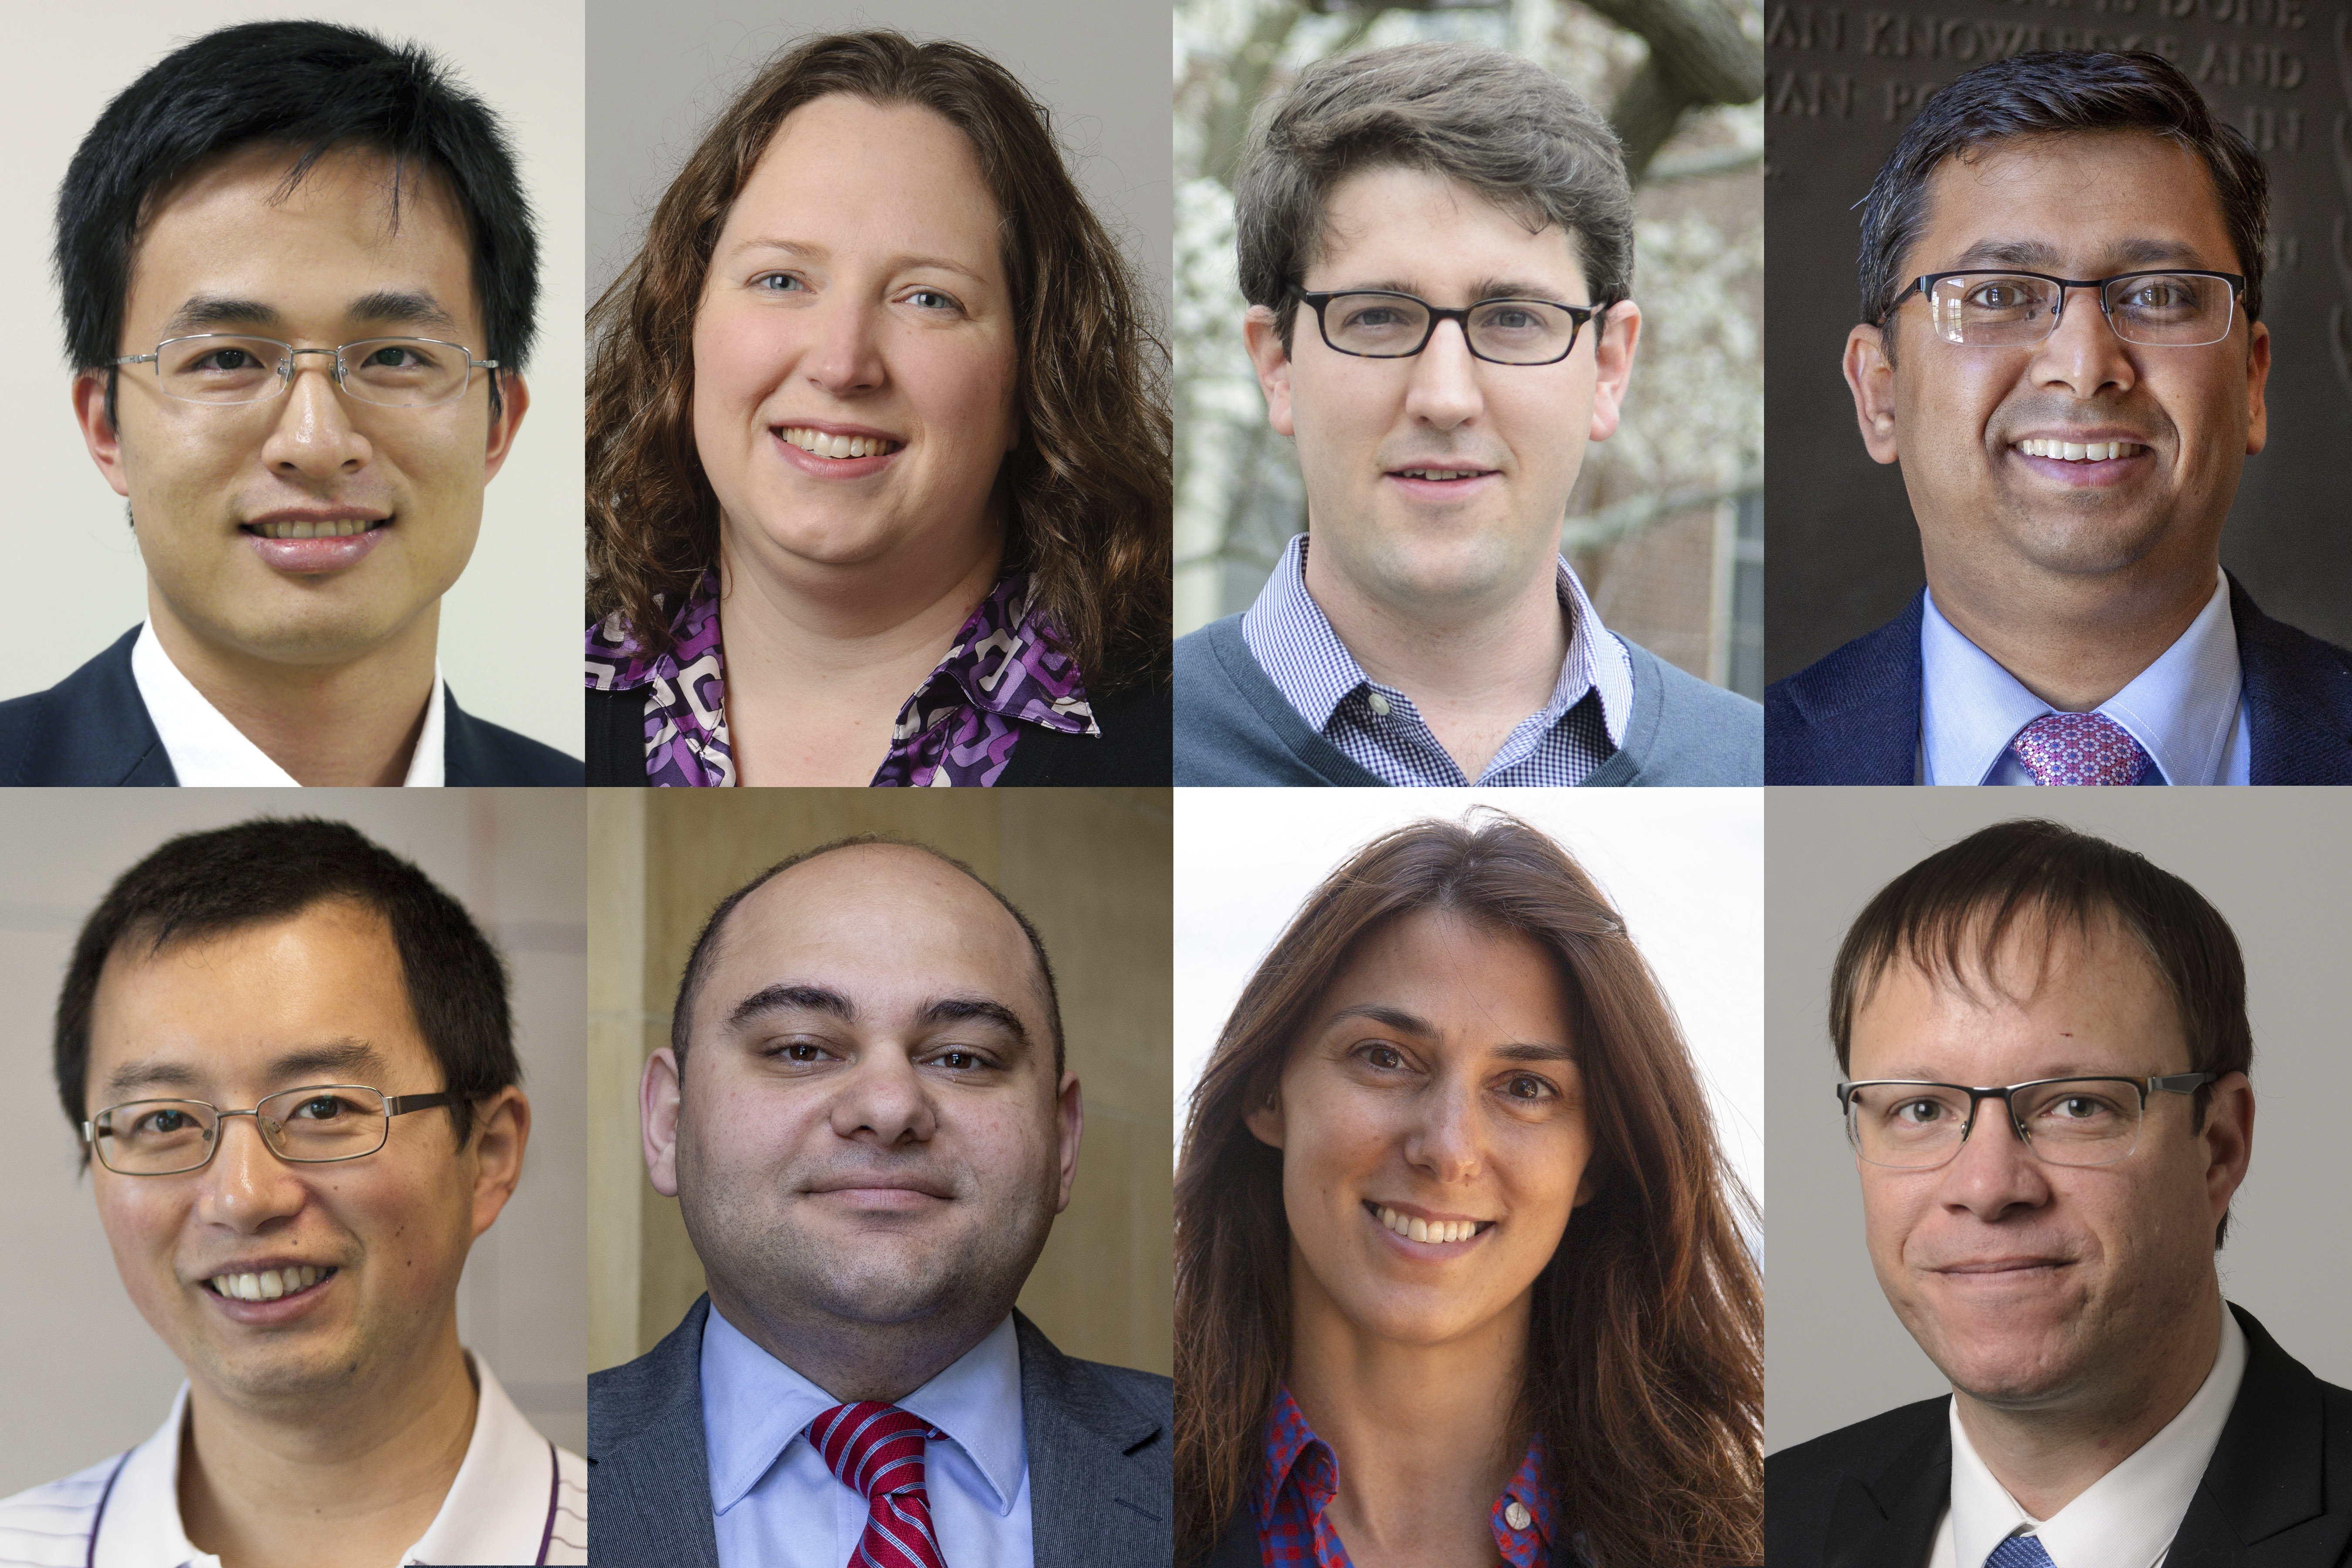 Eight early-career researchers in math, science, and engineering received the selective grant this spring. Top row from left, Xu Chen, Kristina Wagstrom, Michael Hren, Mohammad Khan; bottom row from left, Liang Xiao, Ali Bazzi, Kelly Lombardo, Julian Norato.